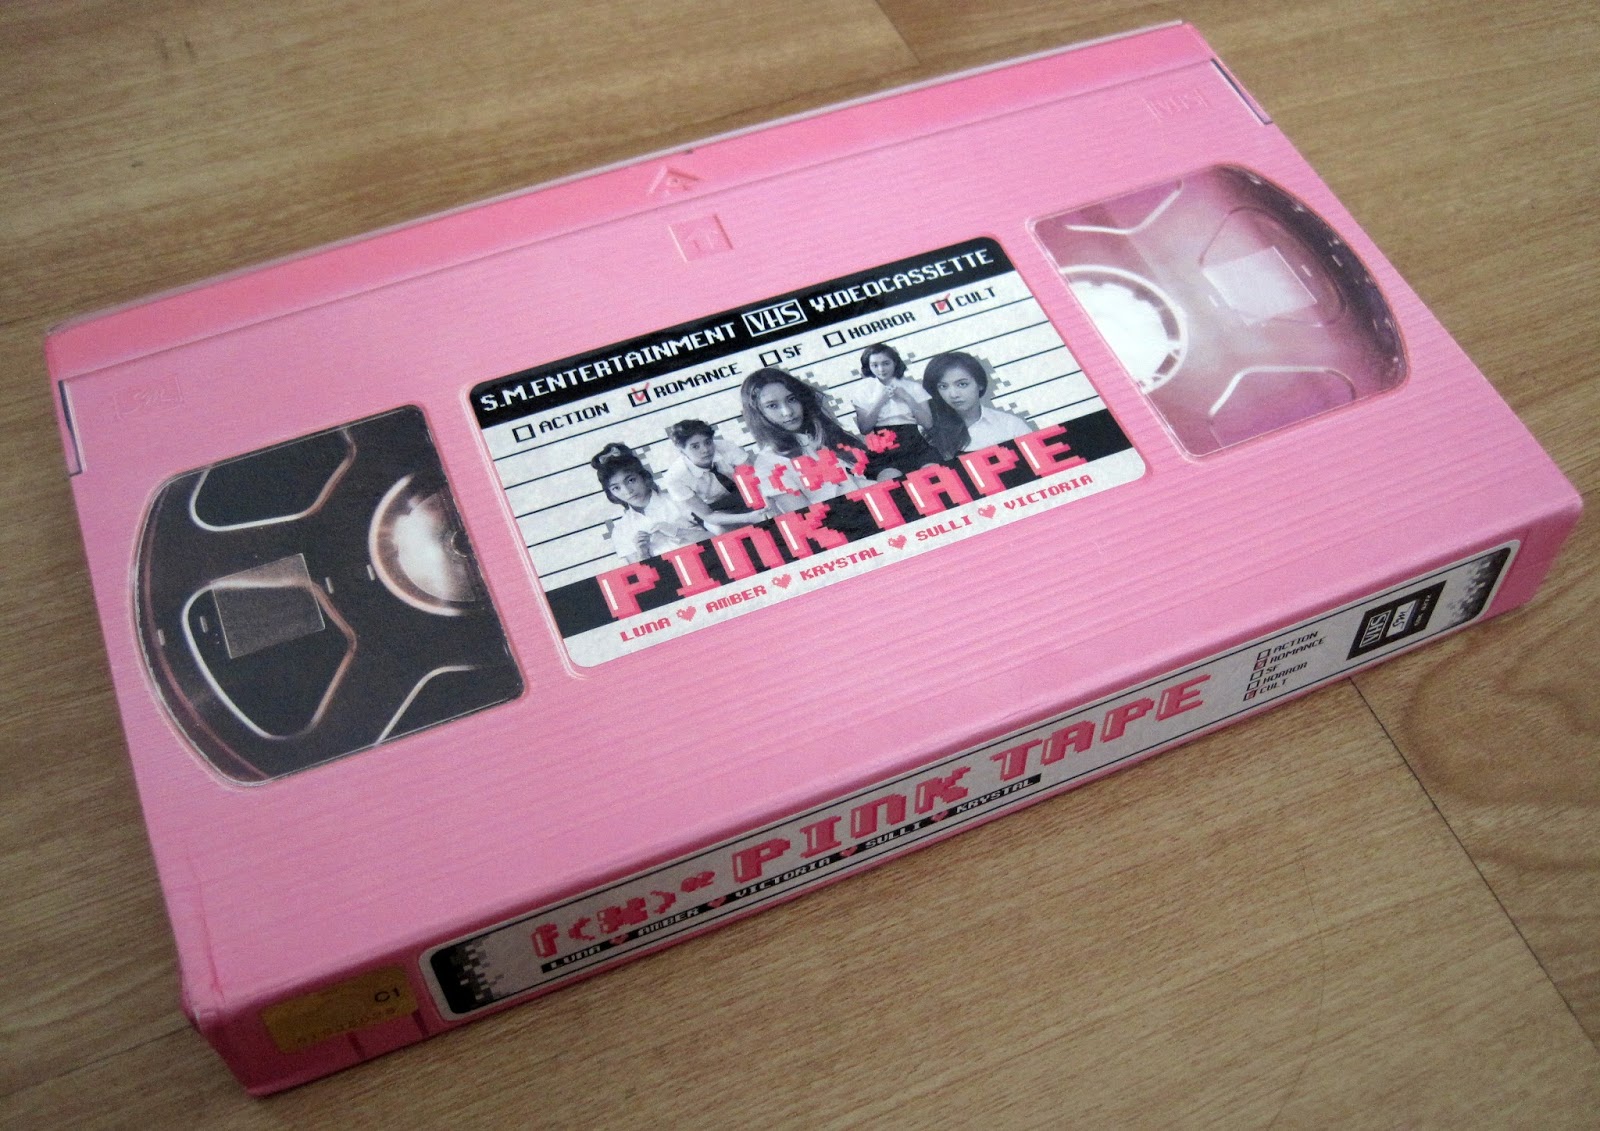 Lythicia's Kpop Collection: f(x)'s 2nd Album - Pink Tape